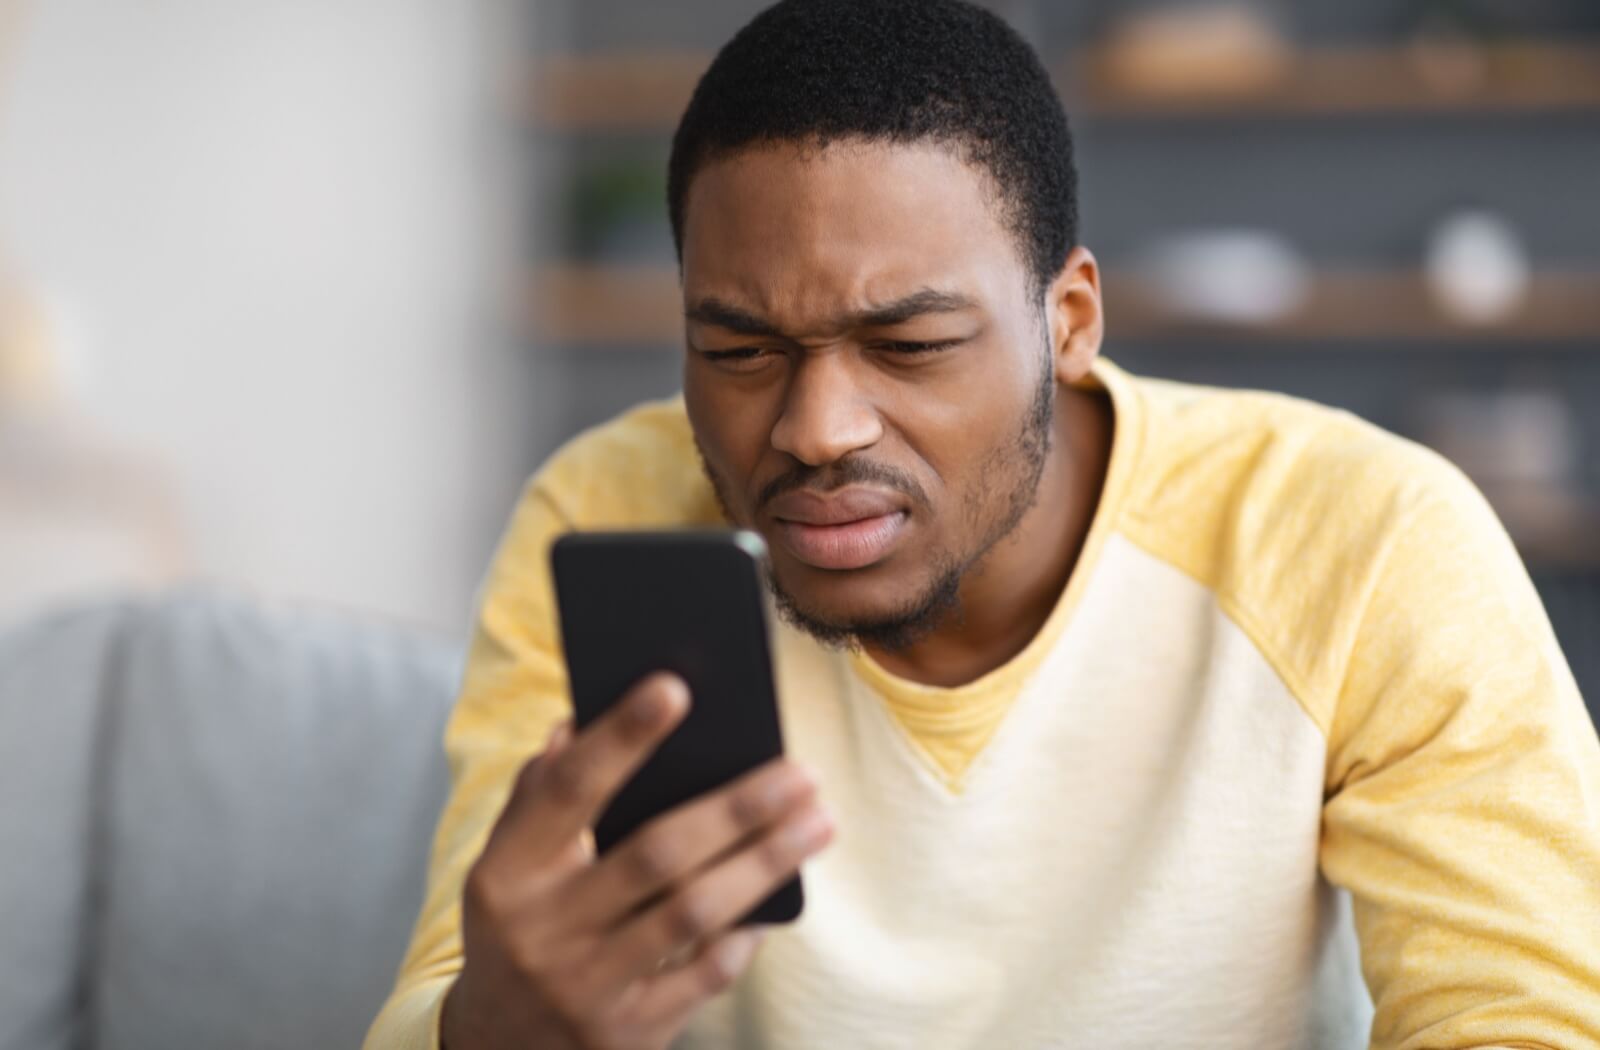 A man squinting to see the contents of his phone clearly — a possible sign of myopia.